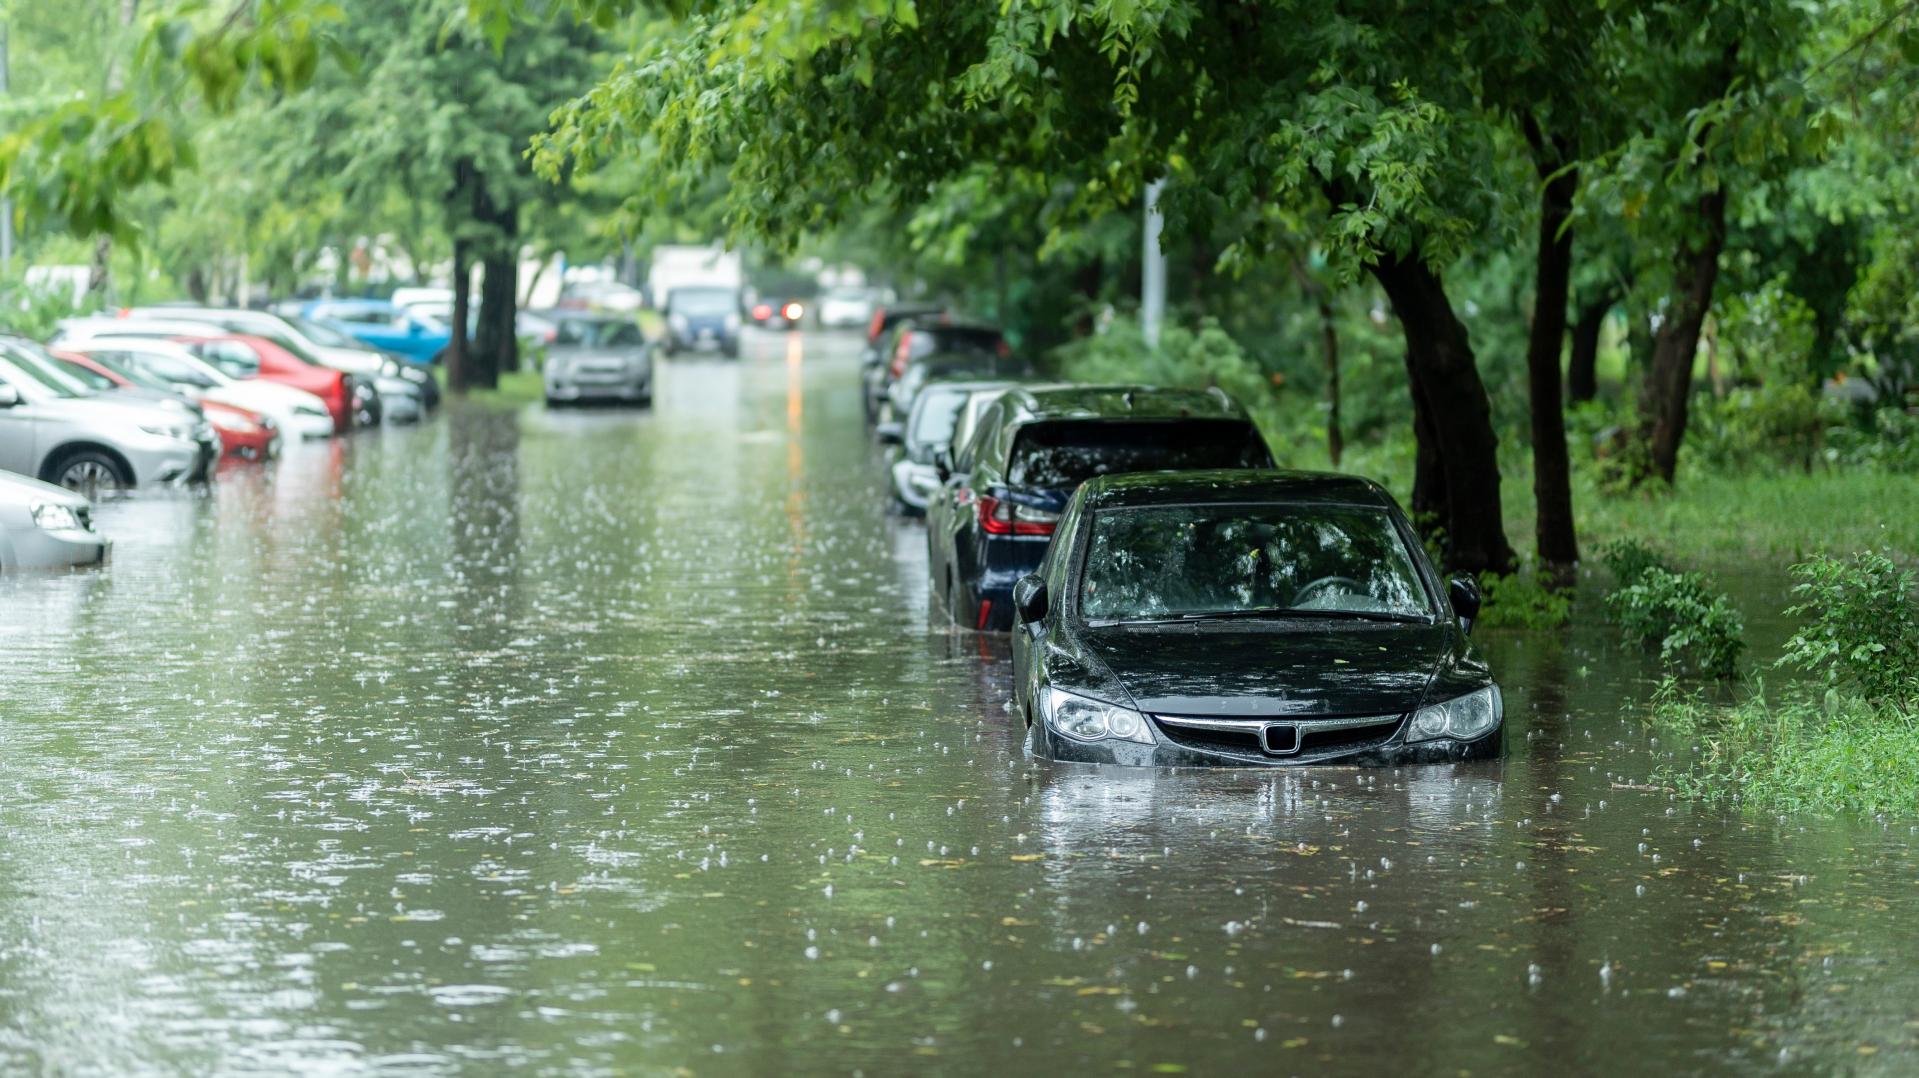 Flooded Street with Cars